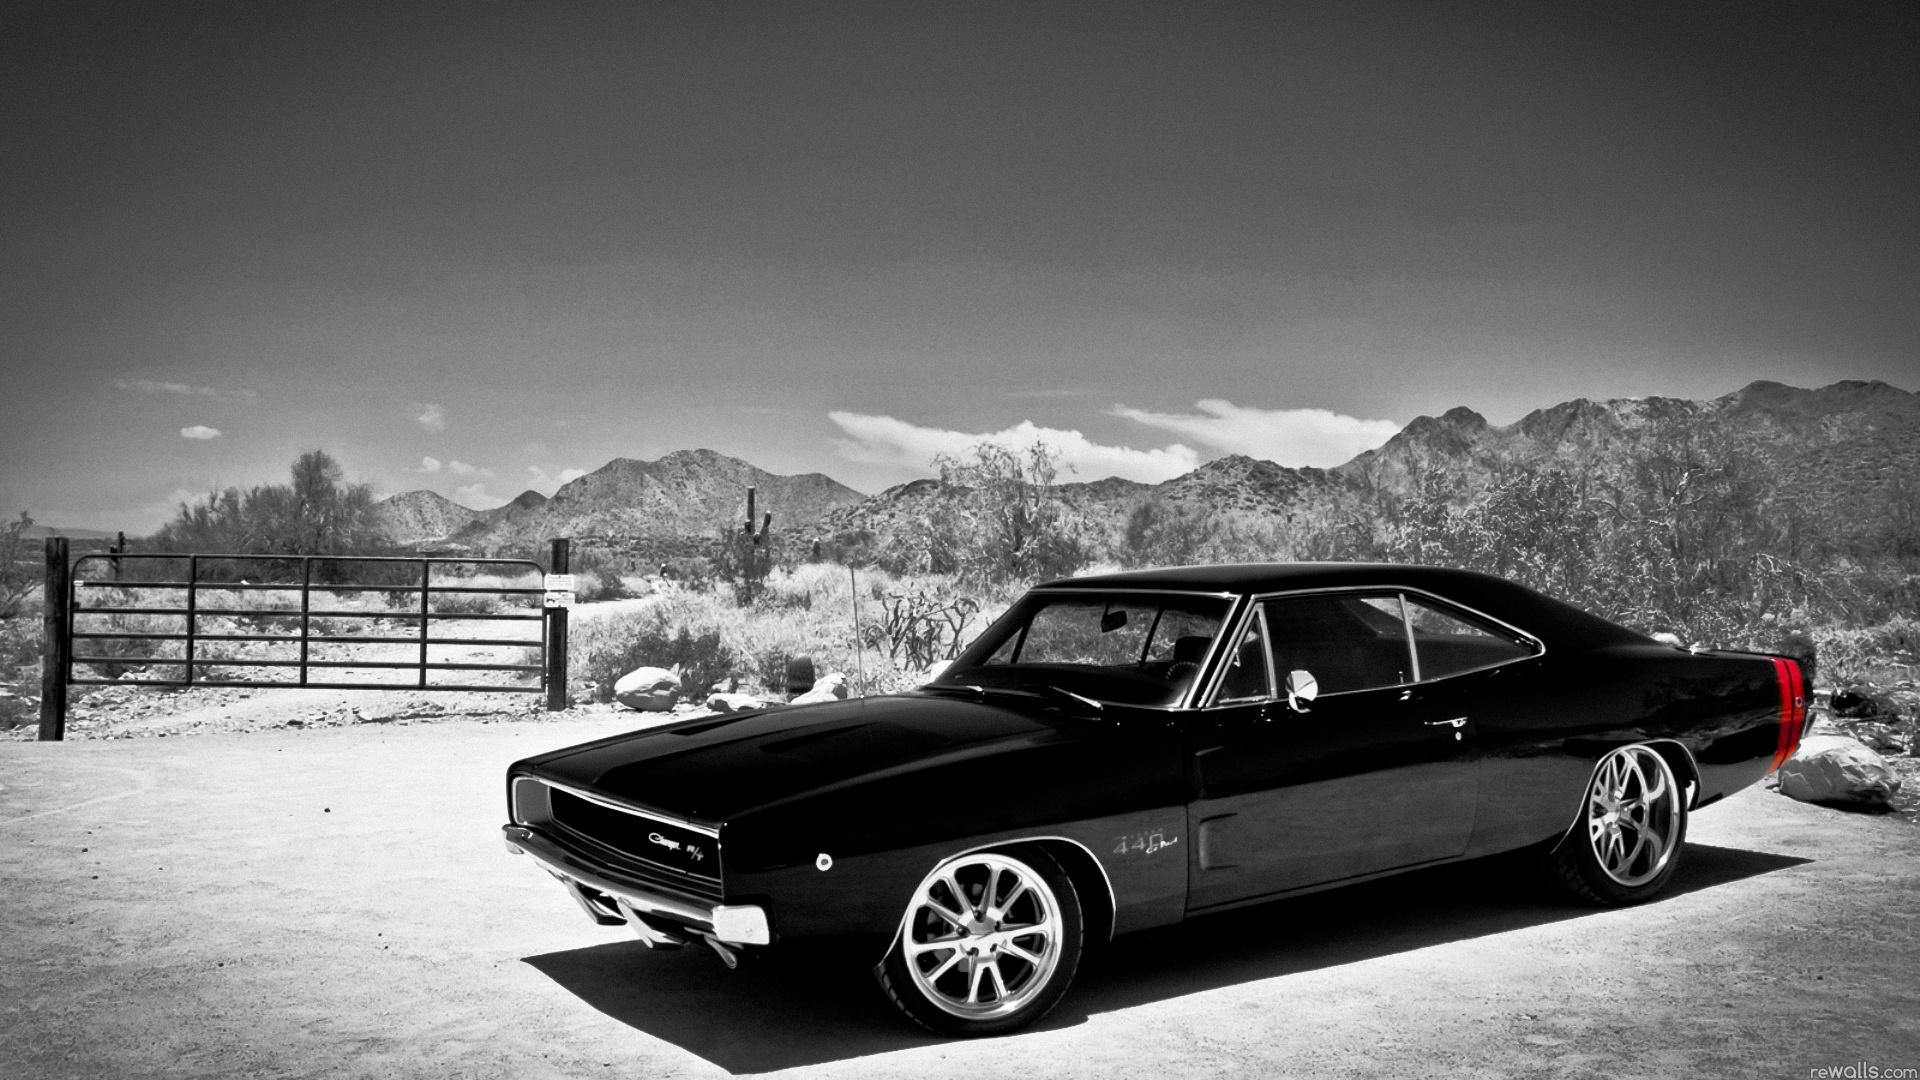 Muscle Car #6